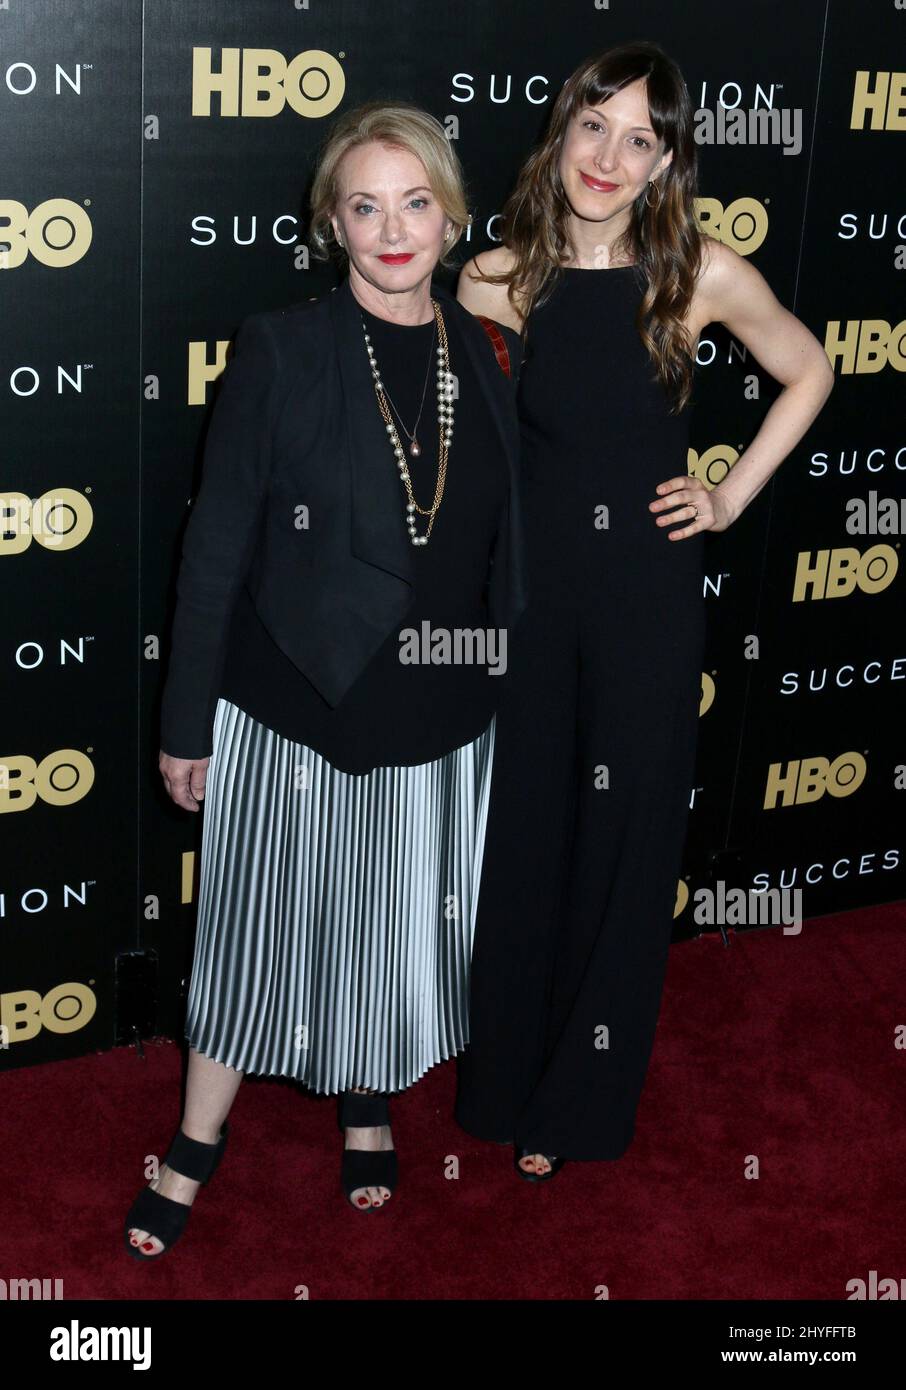 J. Smith-Cameron & Natalie Gold attending HBO's 'Succession' Premiere Held at the Time Warner Center on May 22, 2018. Stock Photo